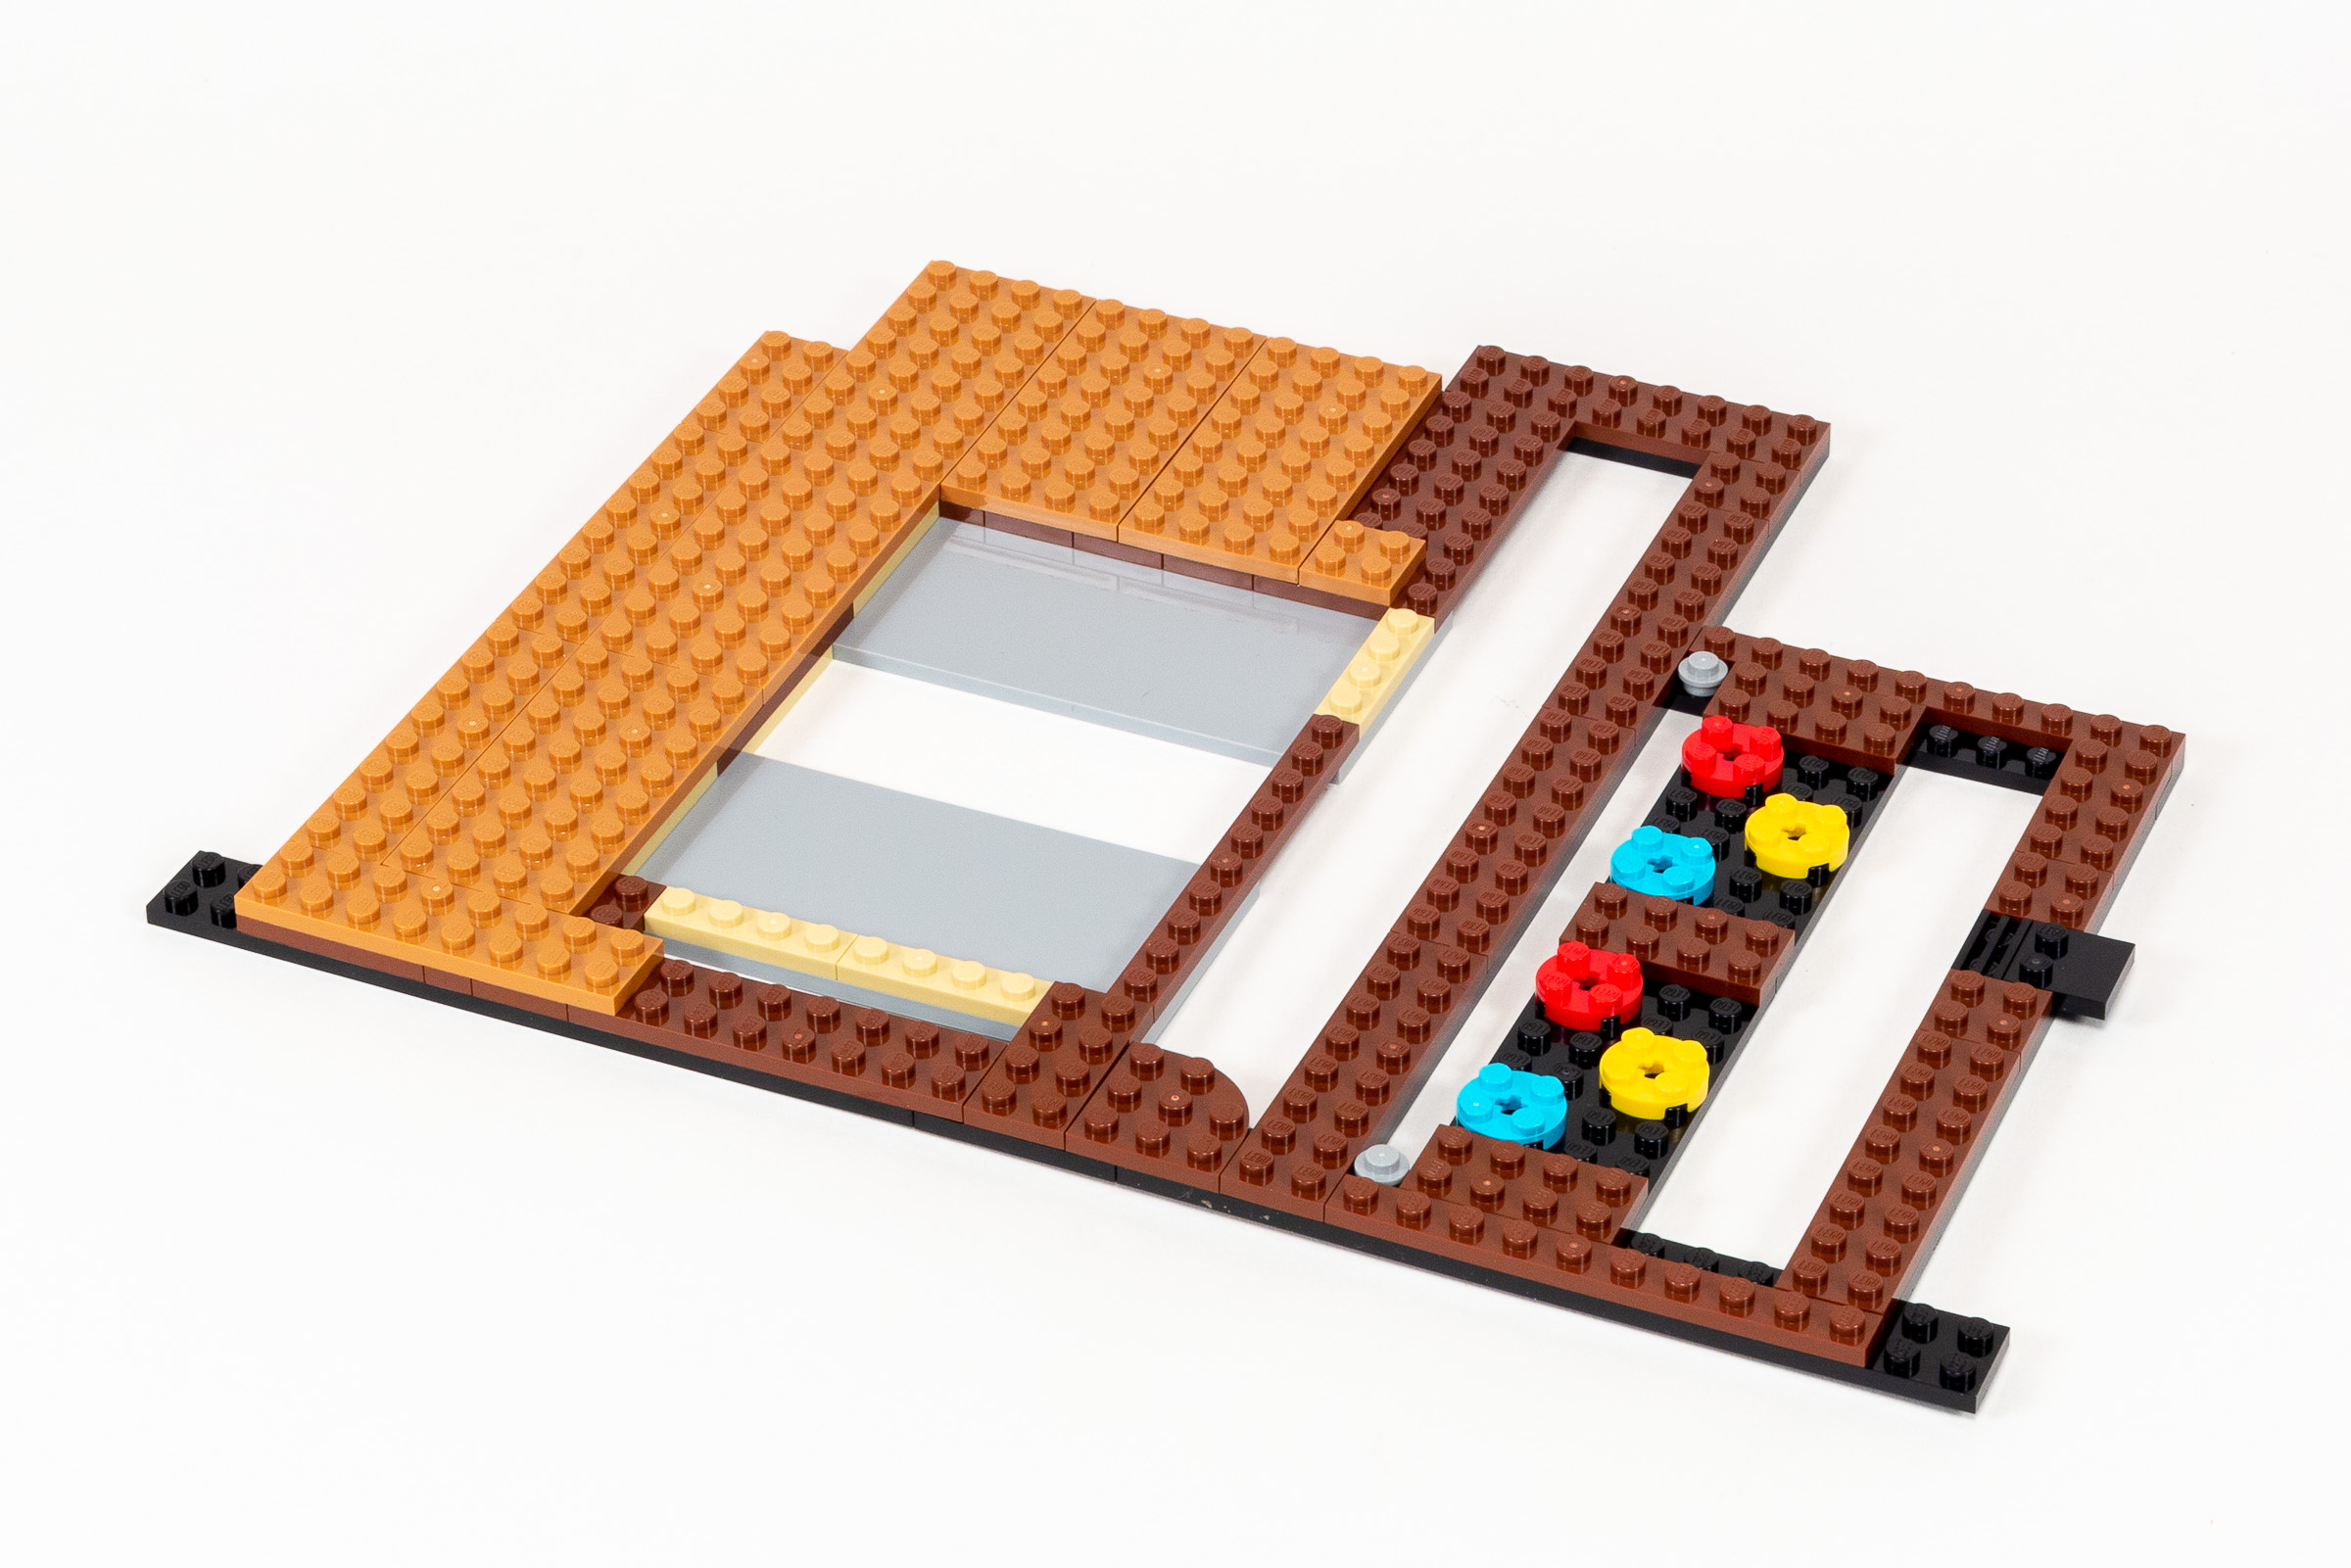 Official reveal of LEGO 10292 F.R.I.E.N.D.S Apartments - Jay's Brick Blog